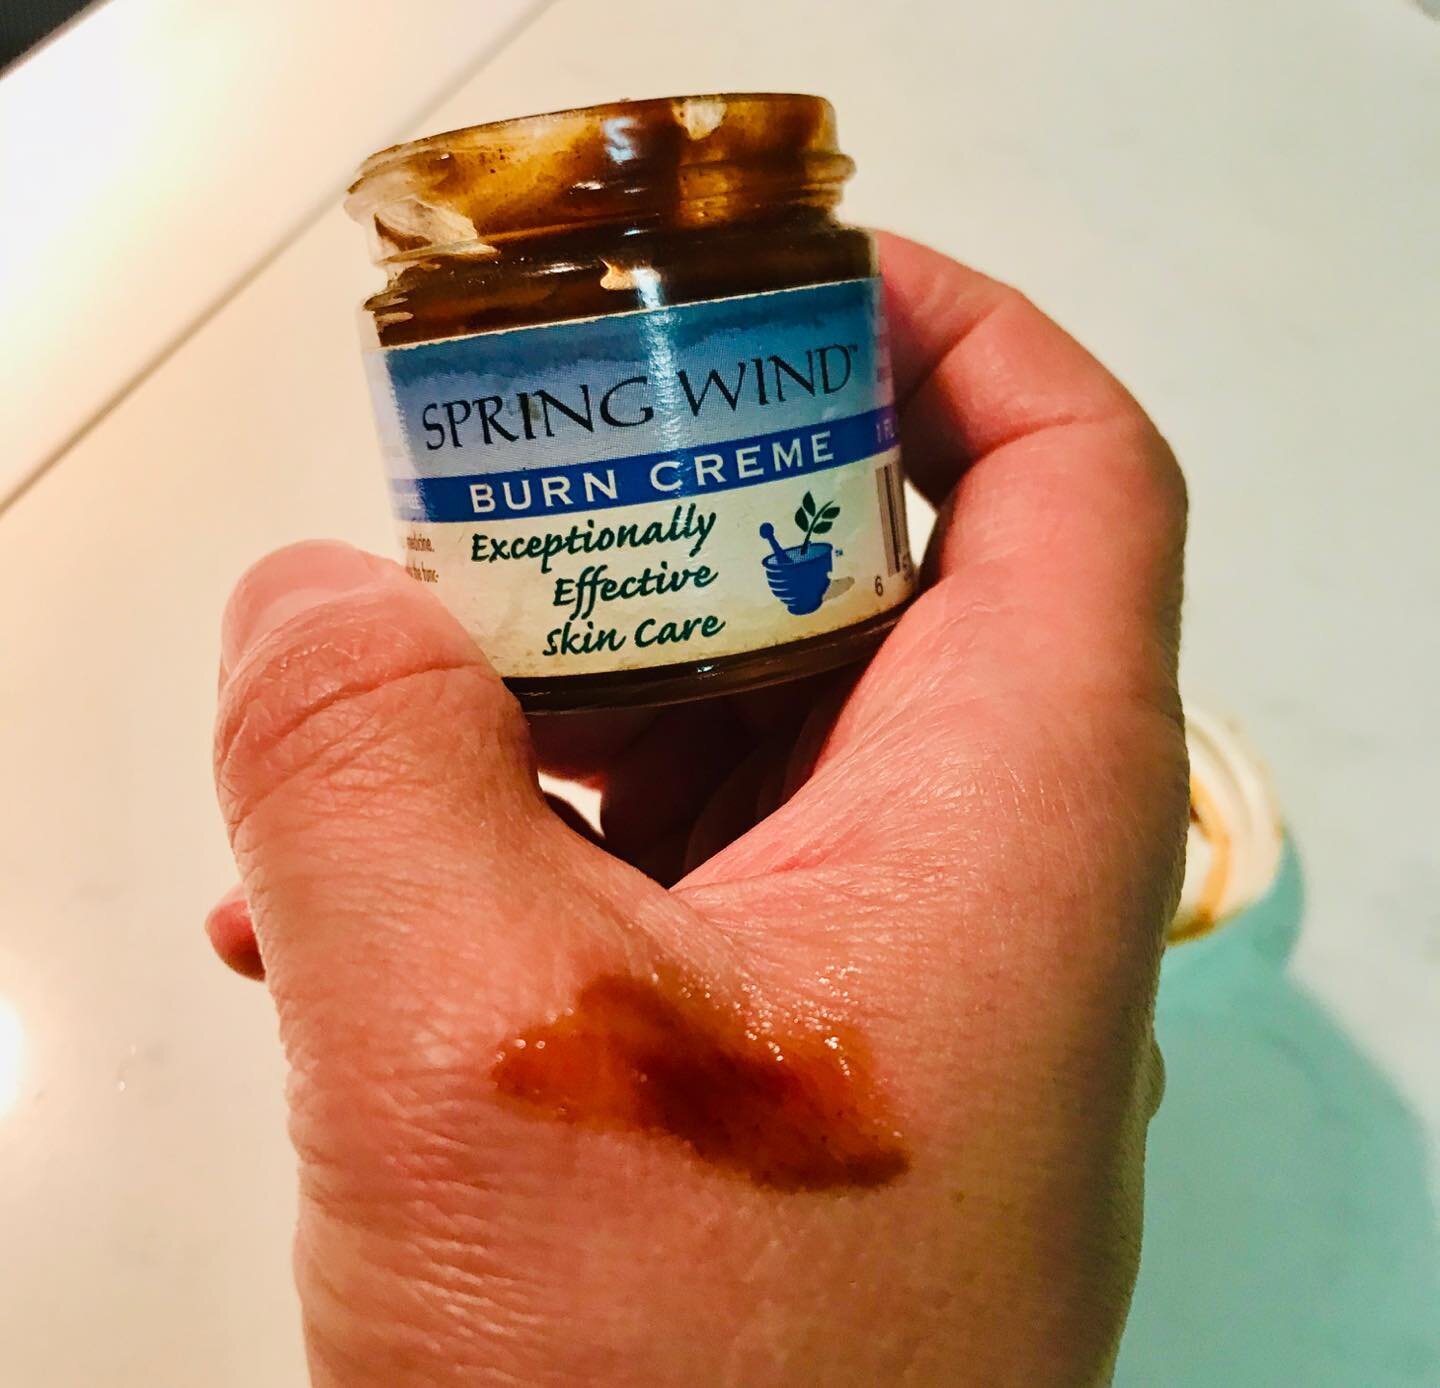 Baker&rsquo;s burn? This is my go to for such events. It removes the pain from burns immediately. A great addition to the medicine cabinet.
#remedy #herbalremedies #baking #herbs #medicinalherbs